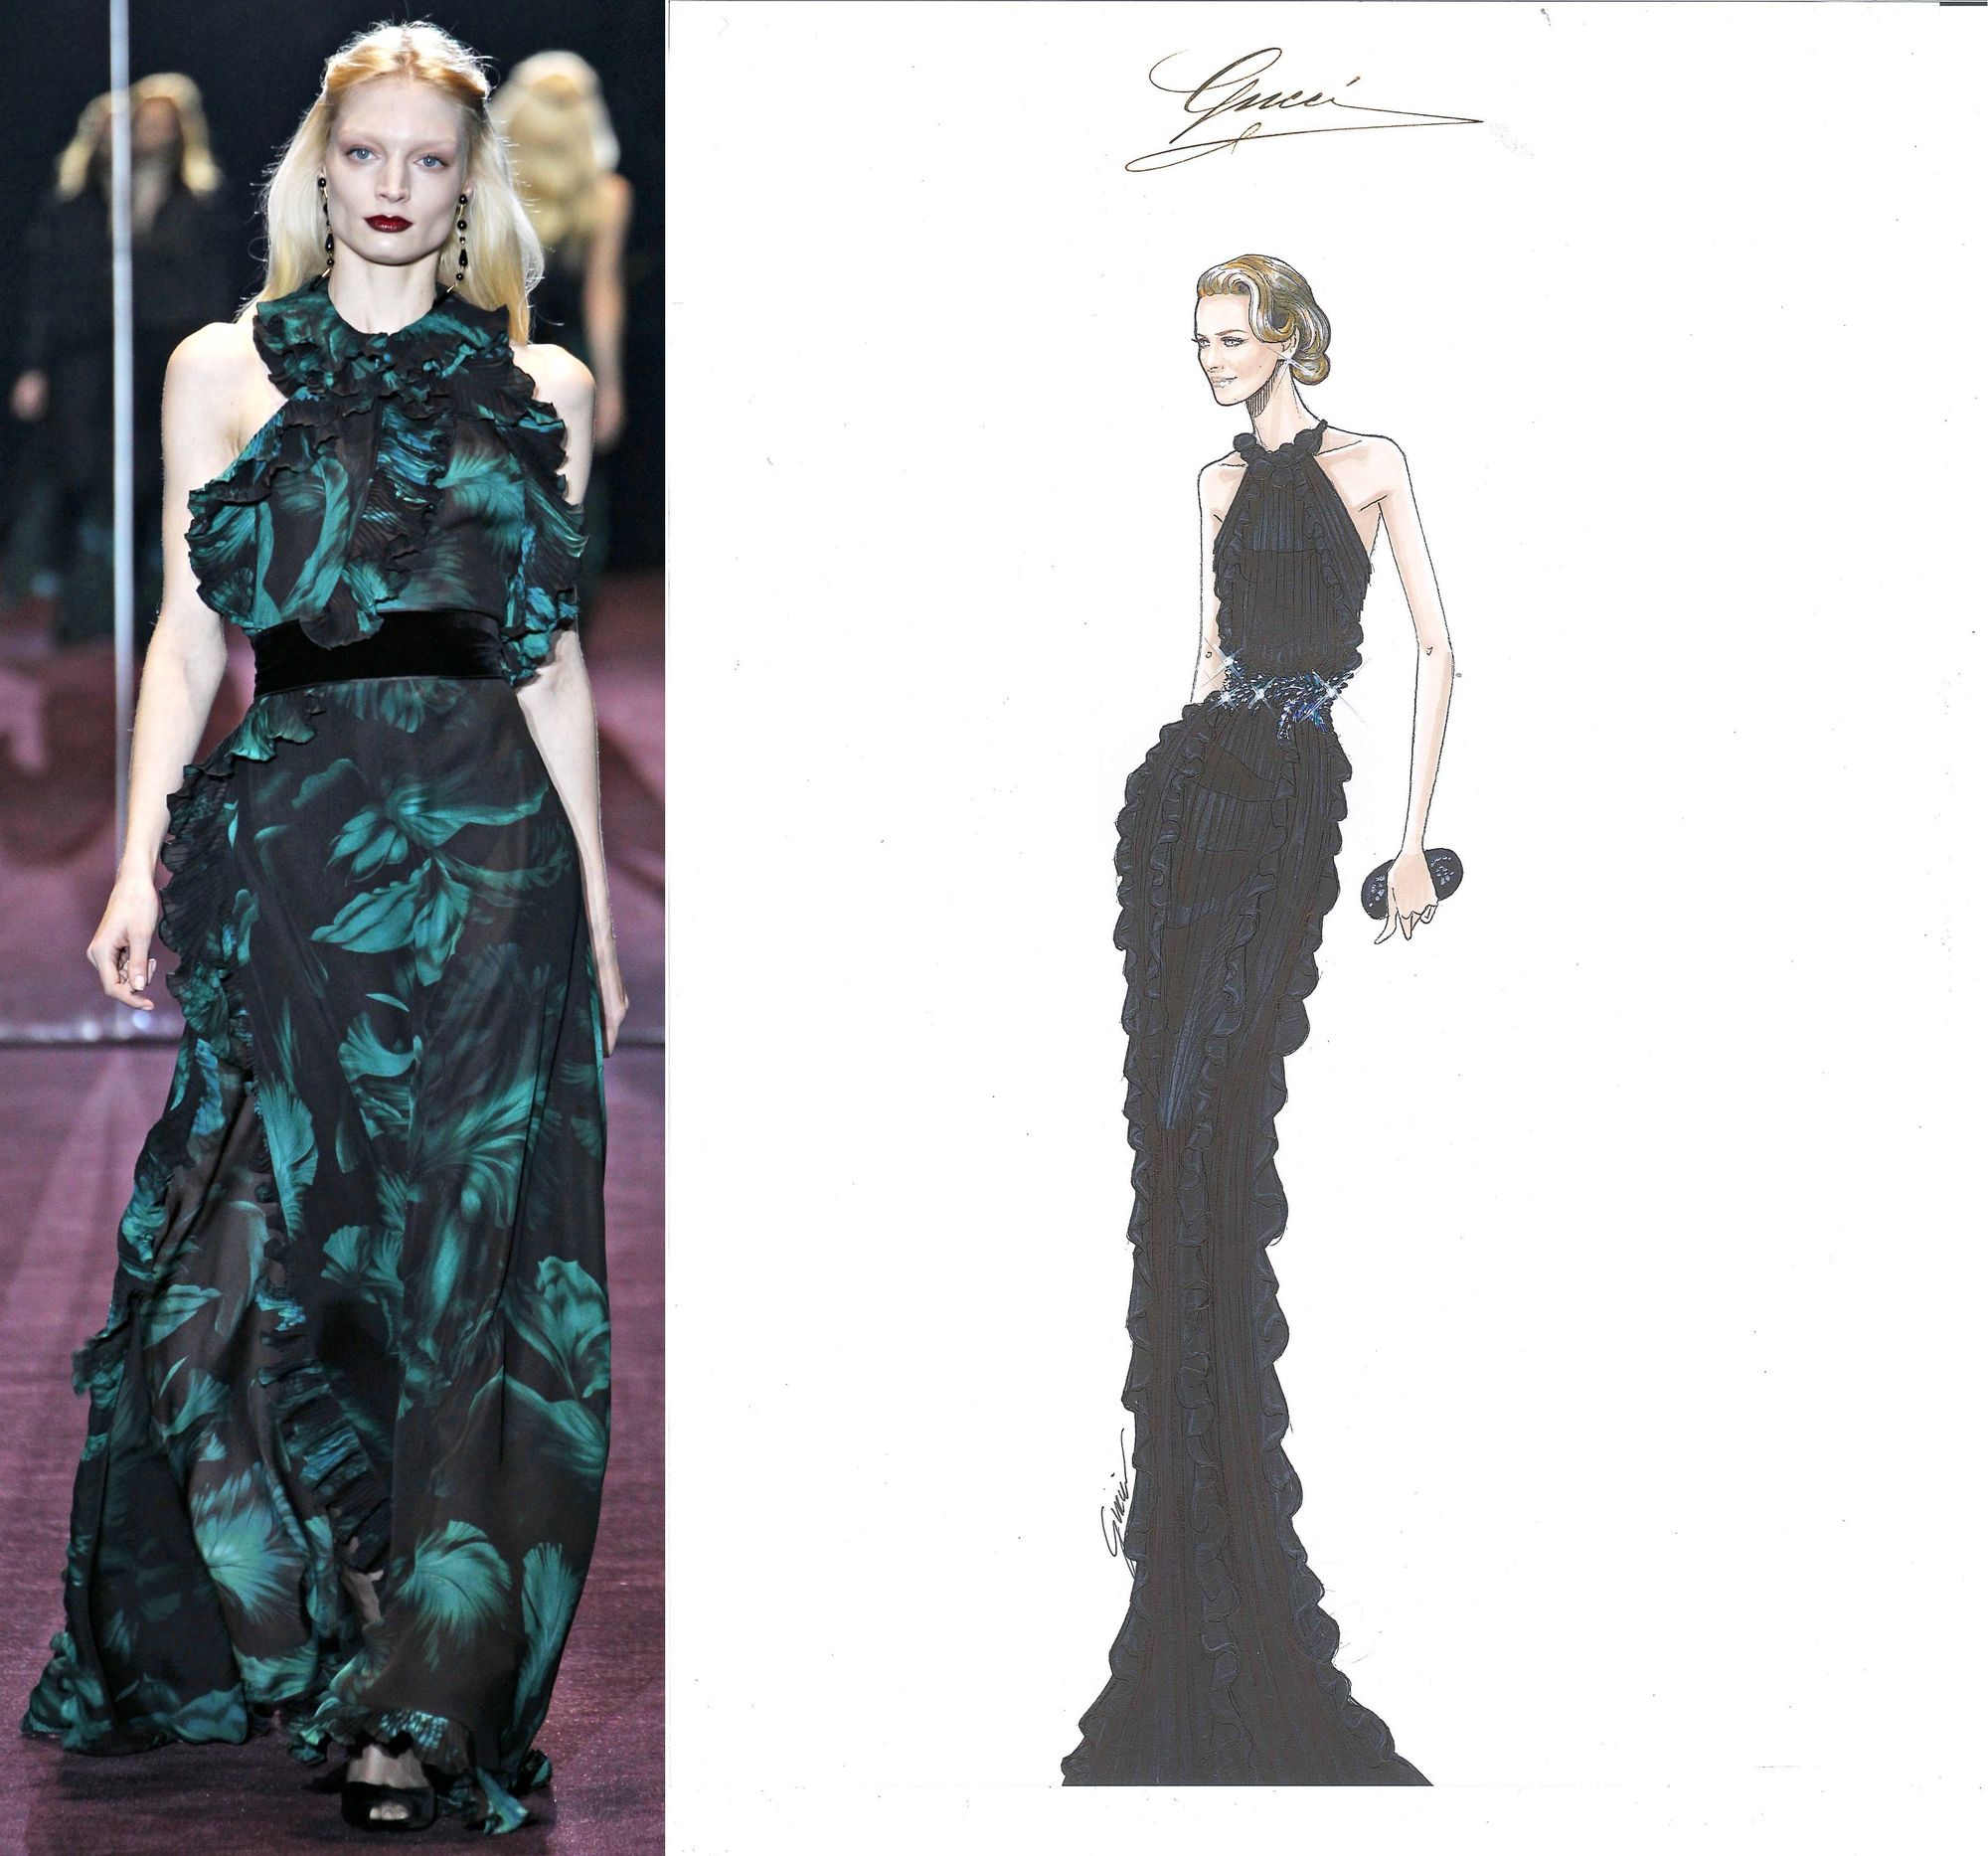 Customisation of the Gucci Autumn/Winter 2012 number for Princess Charlene of Monaco's appearance at the 2012 Ballo del Giglio in Florence, Italy on October 10, 2012 (Photo courtesy | Vogue Italia/GoRunway/Gucci)